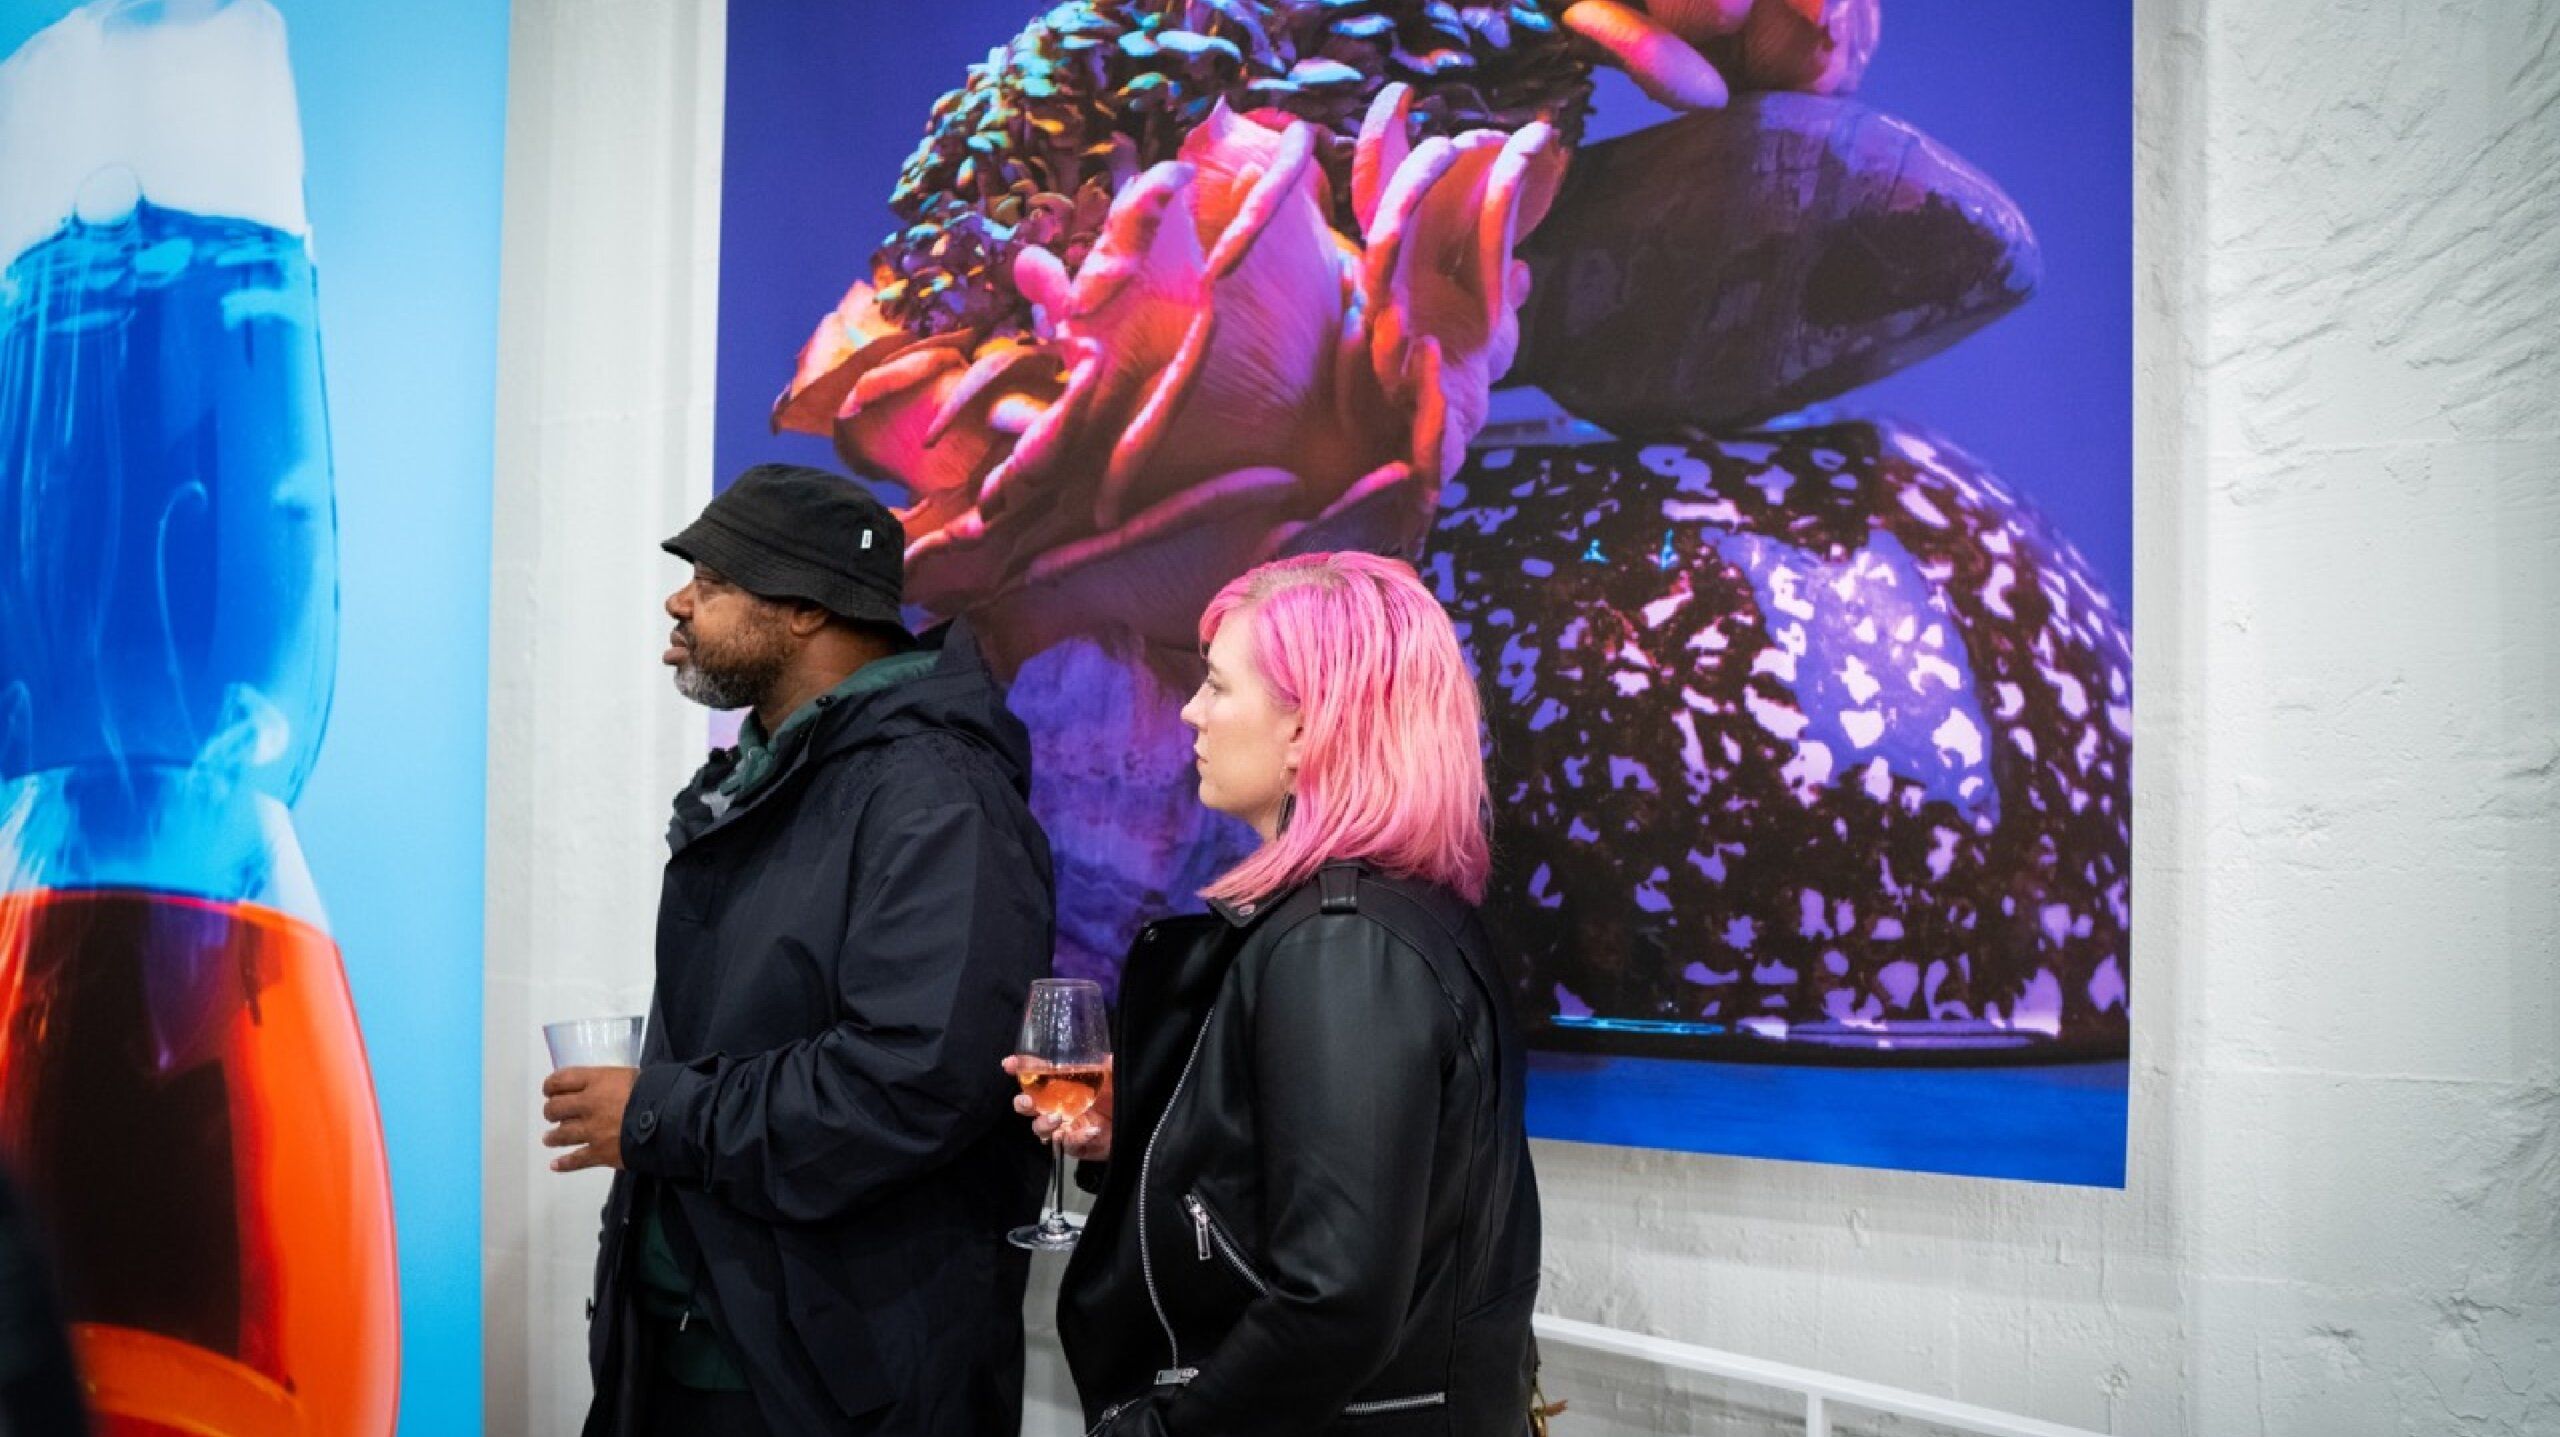 Man and woman with pink hair stand in front of print listening to speakers